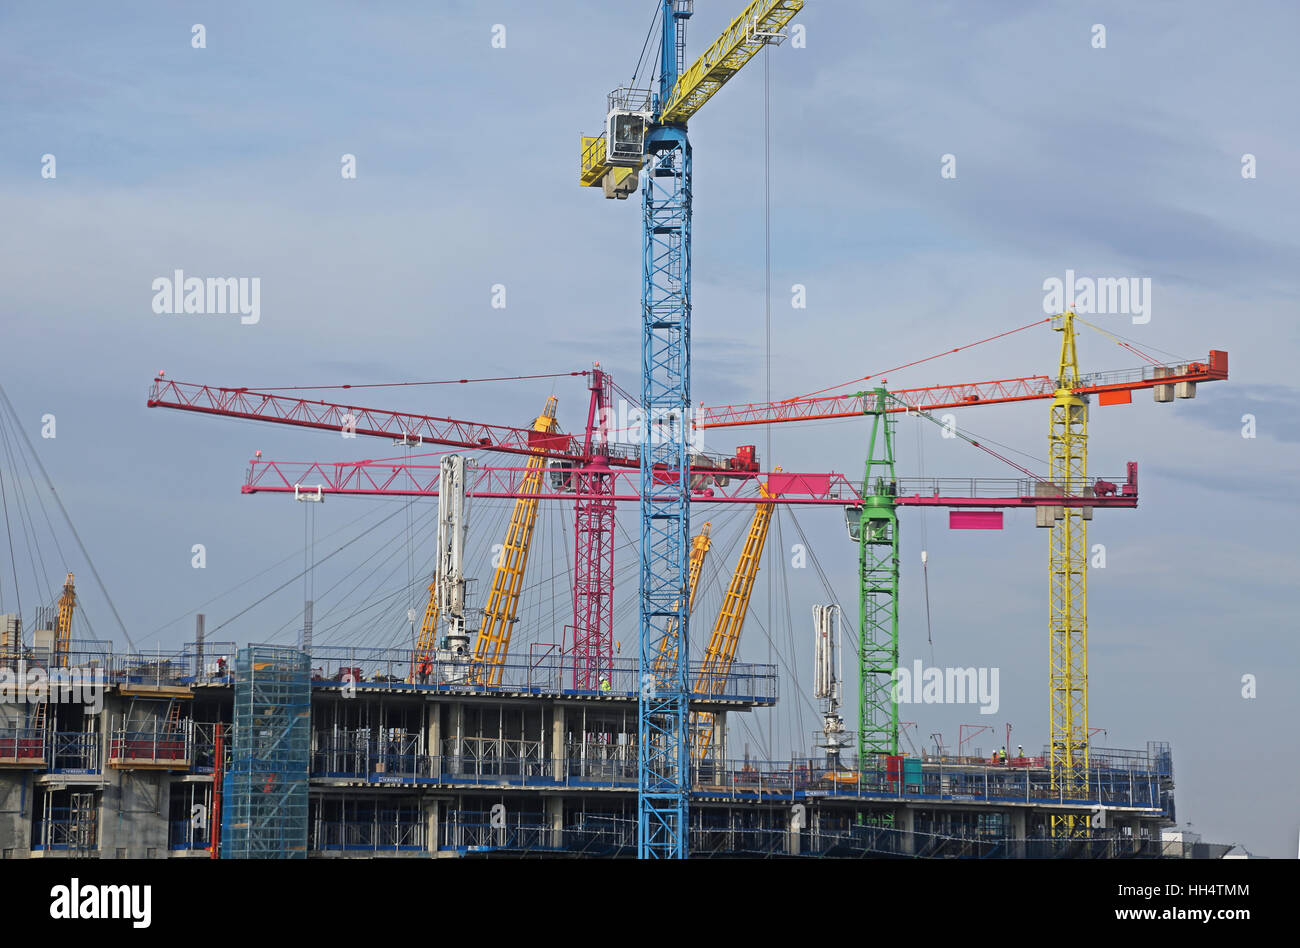 Multi-coloured tower cranes in use during the construction of a major residential development on London's Greenwich Peninsular Stock Photo